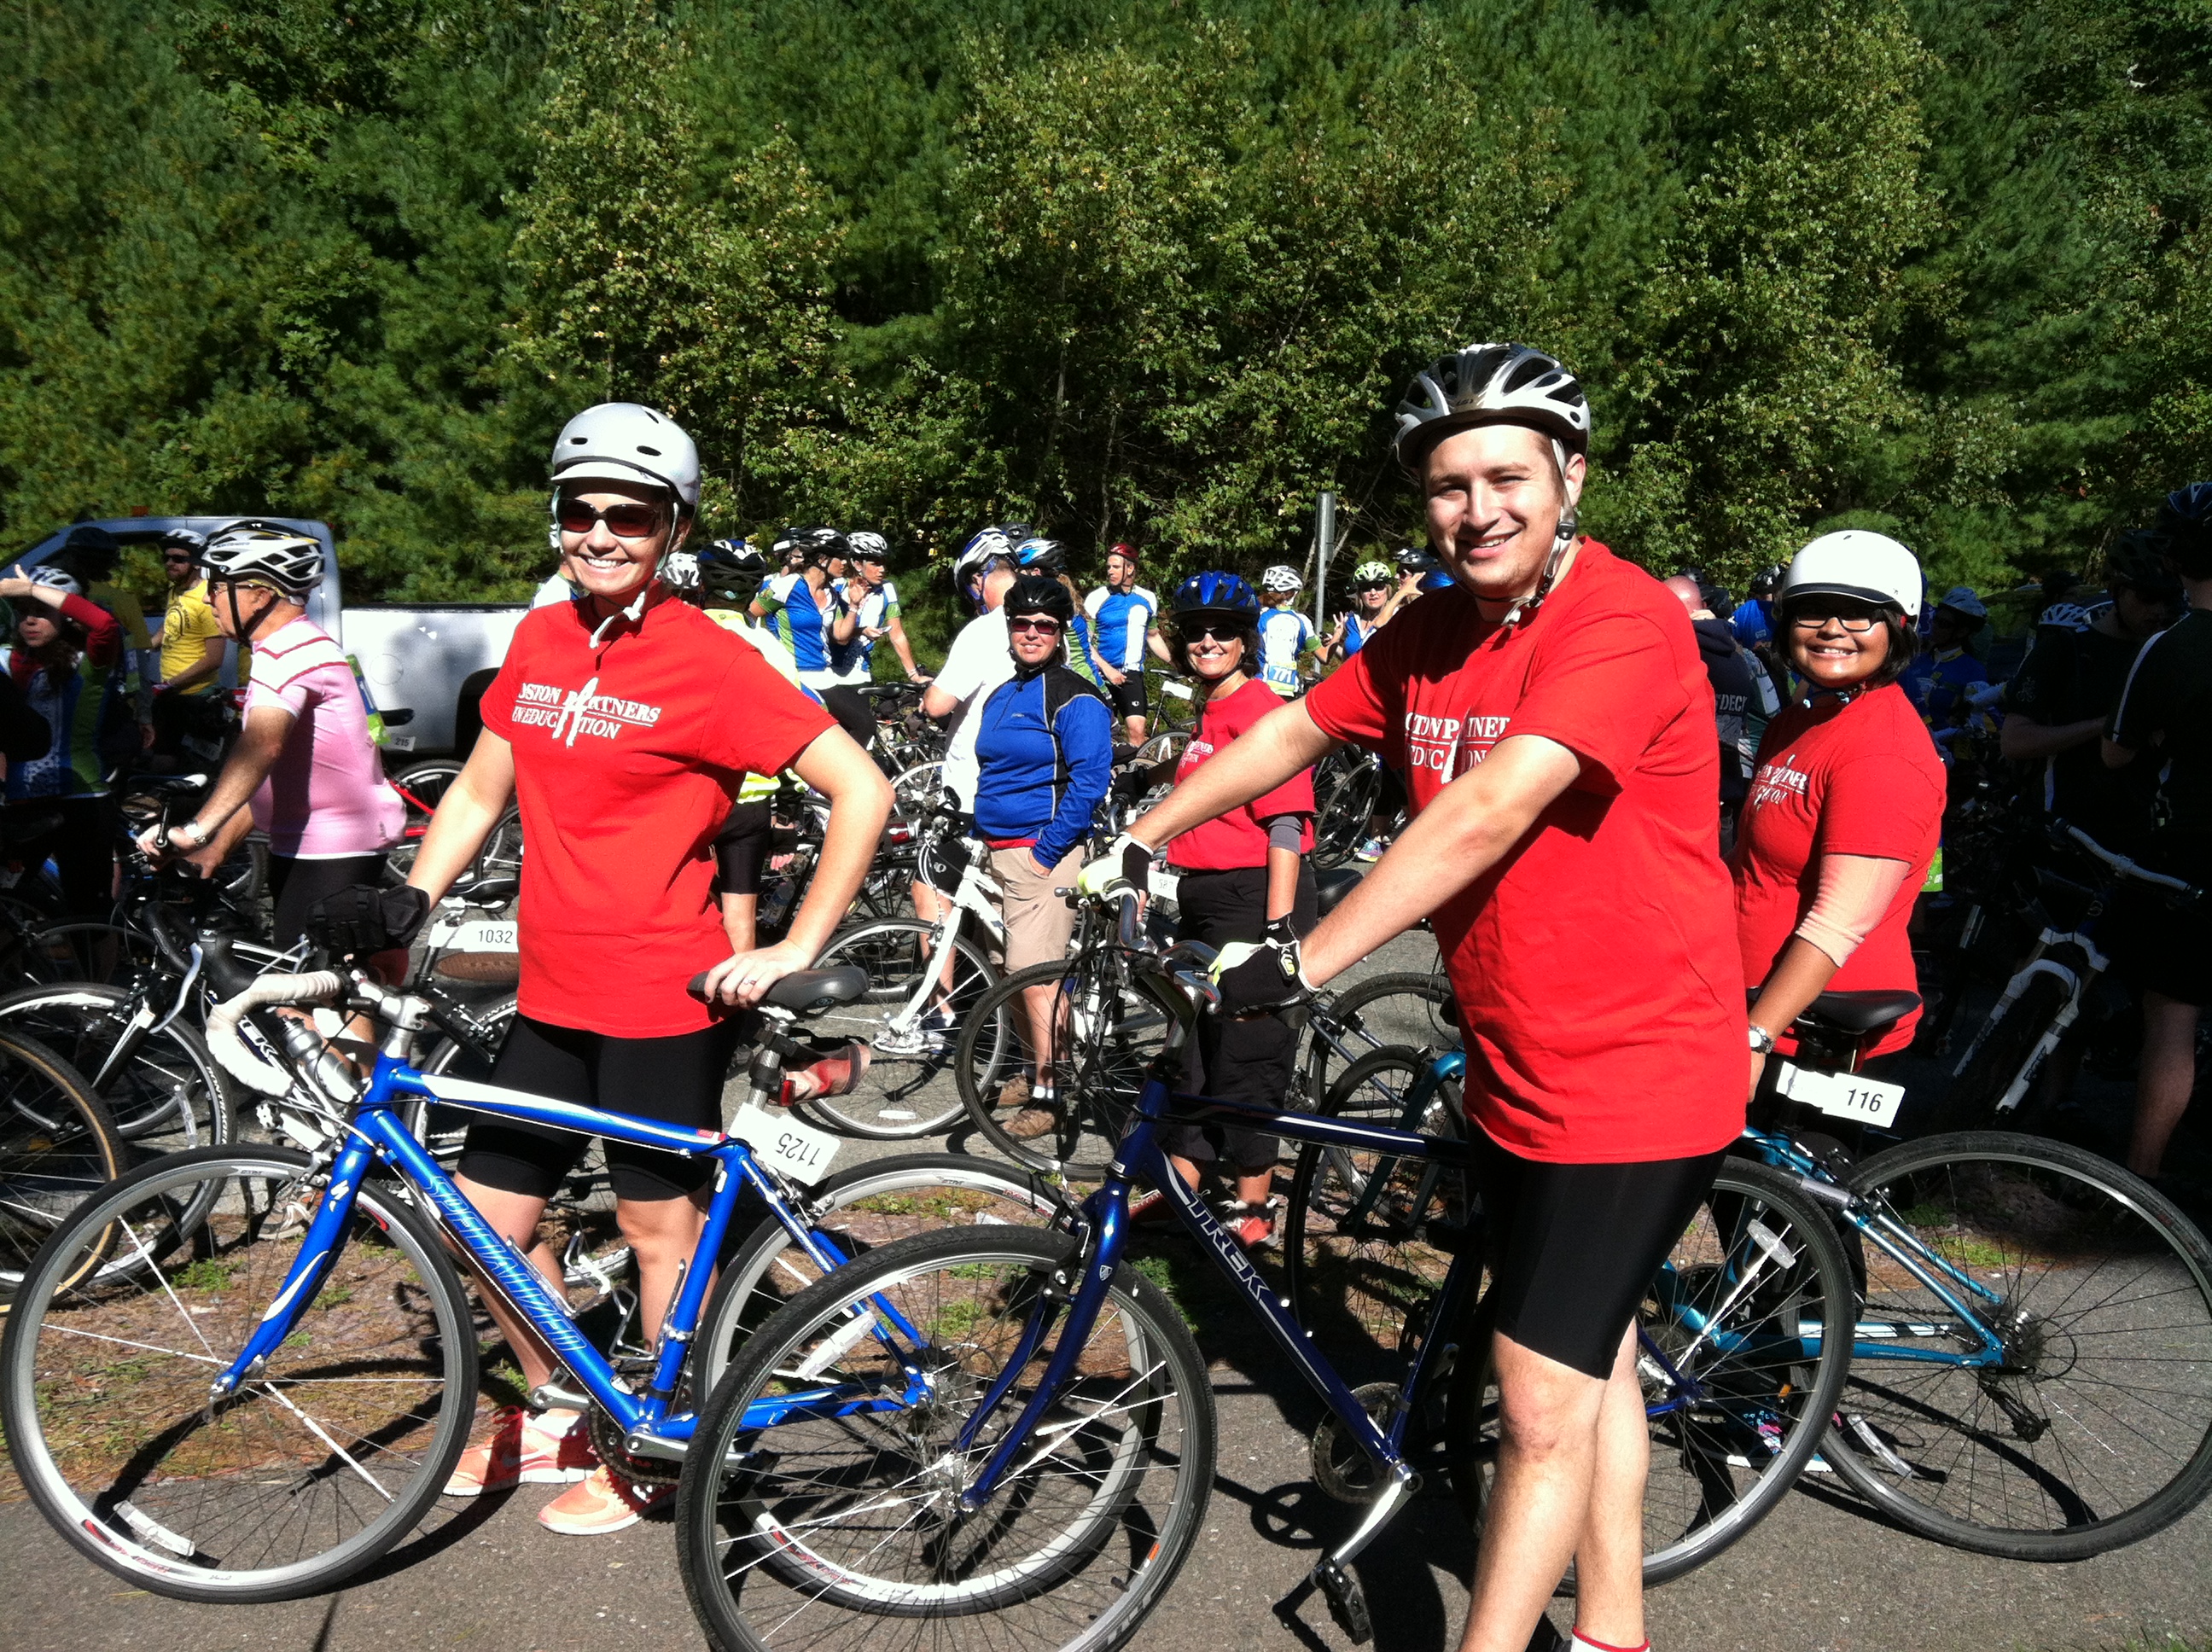 After months of training and fundraising, Team Boston Partners is ready to ride! 